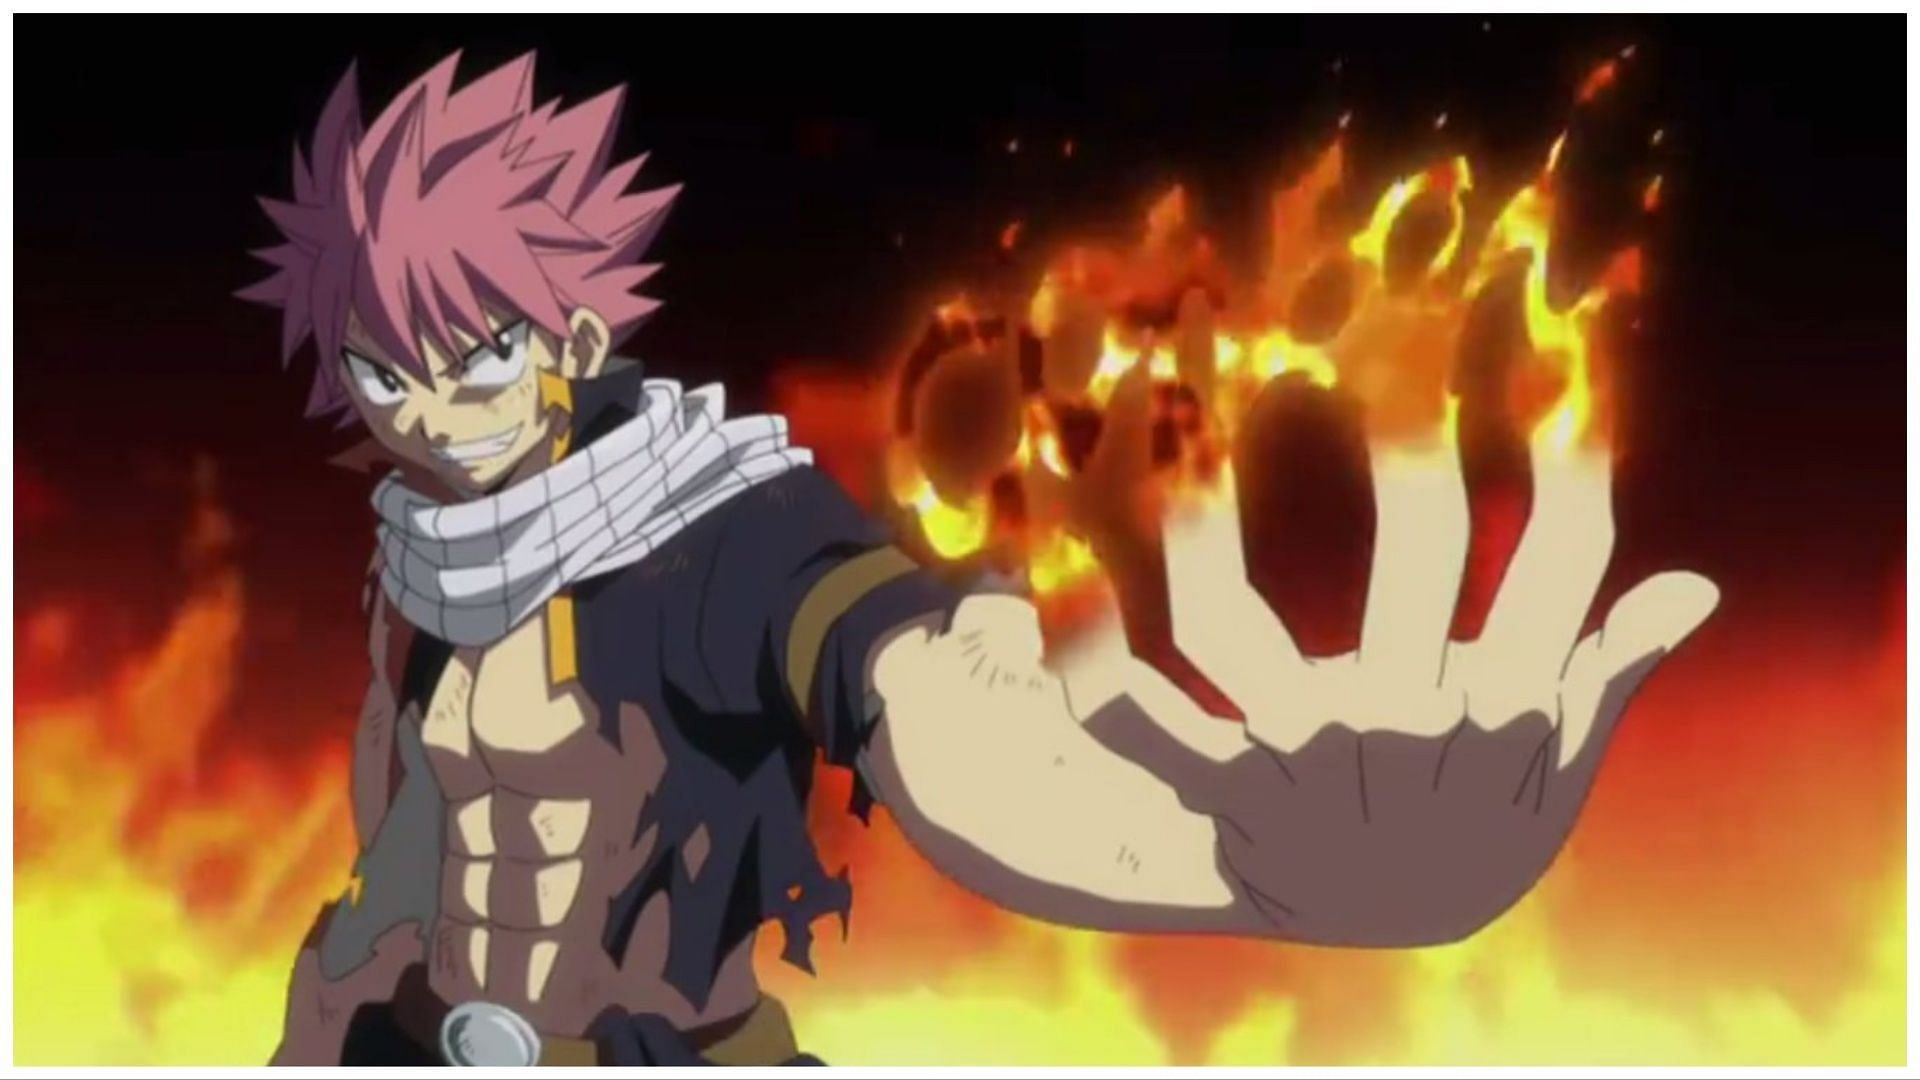 Natsu as seen in Fairy Tail (Image Via A1 Pictures)